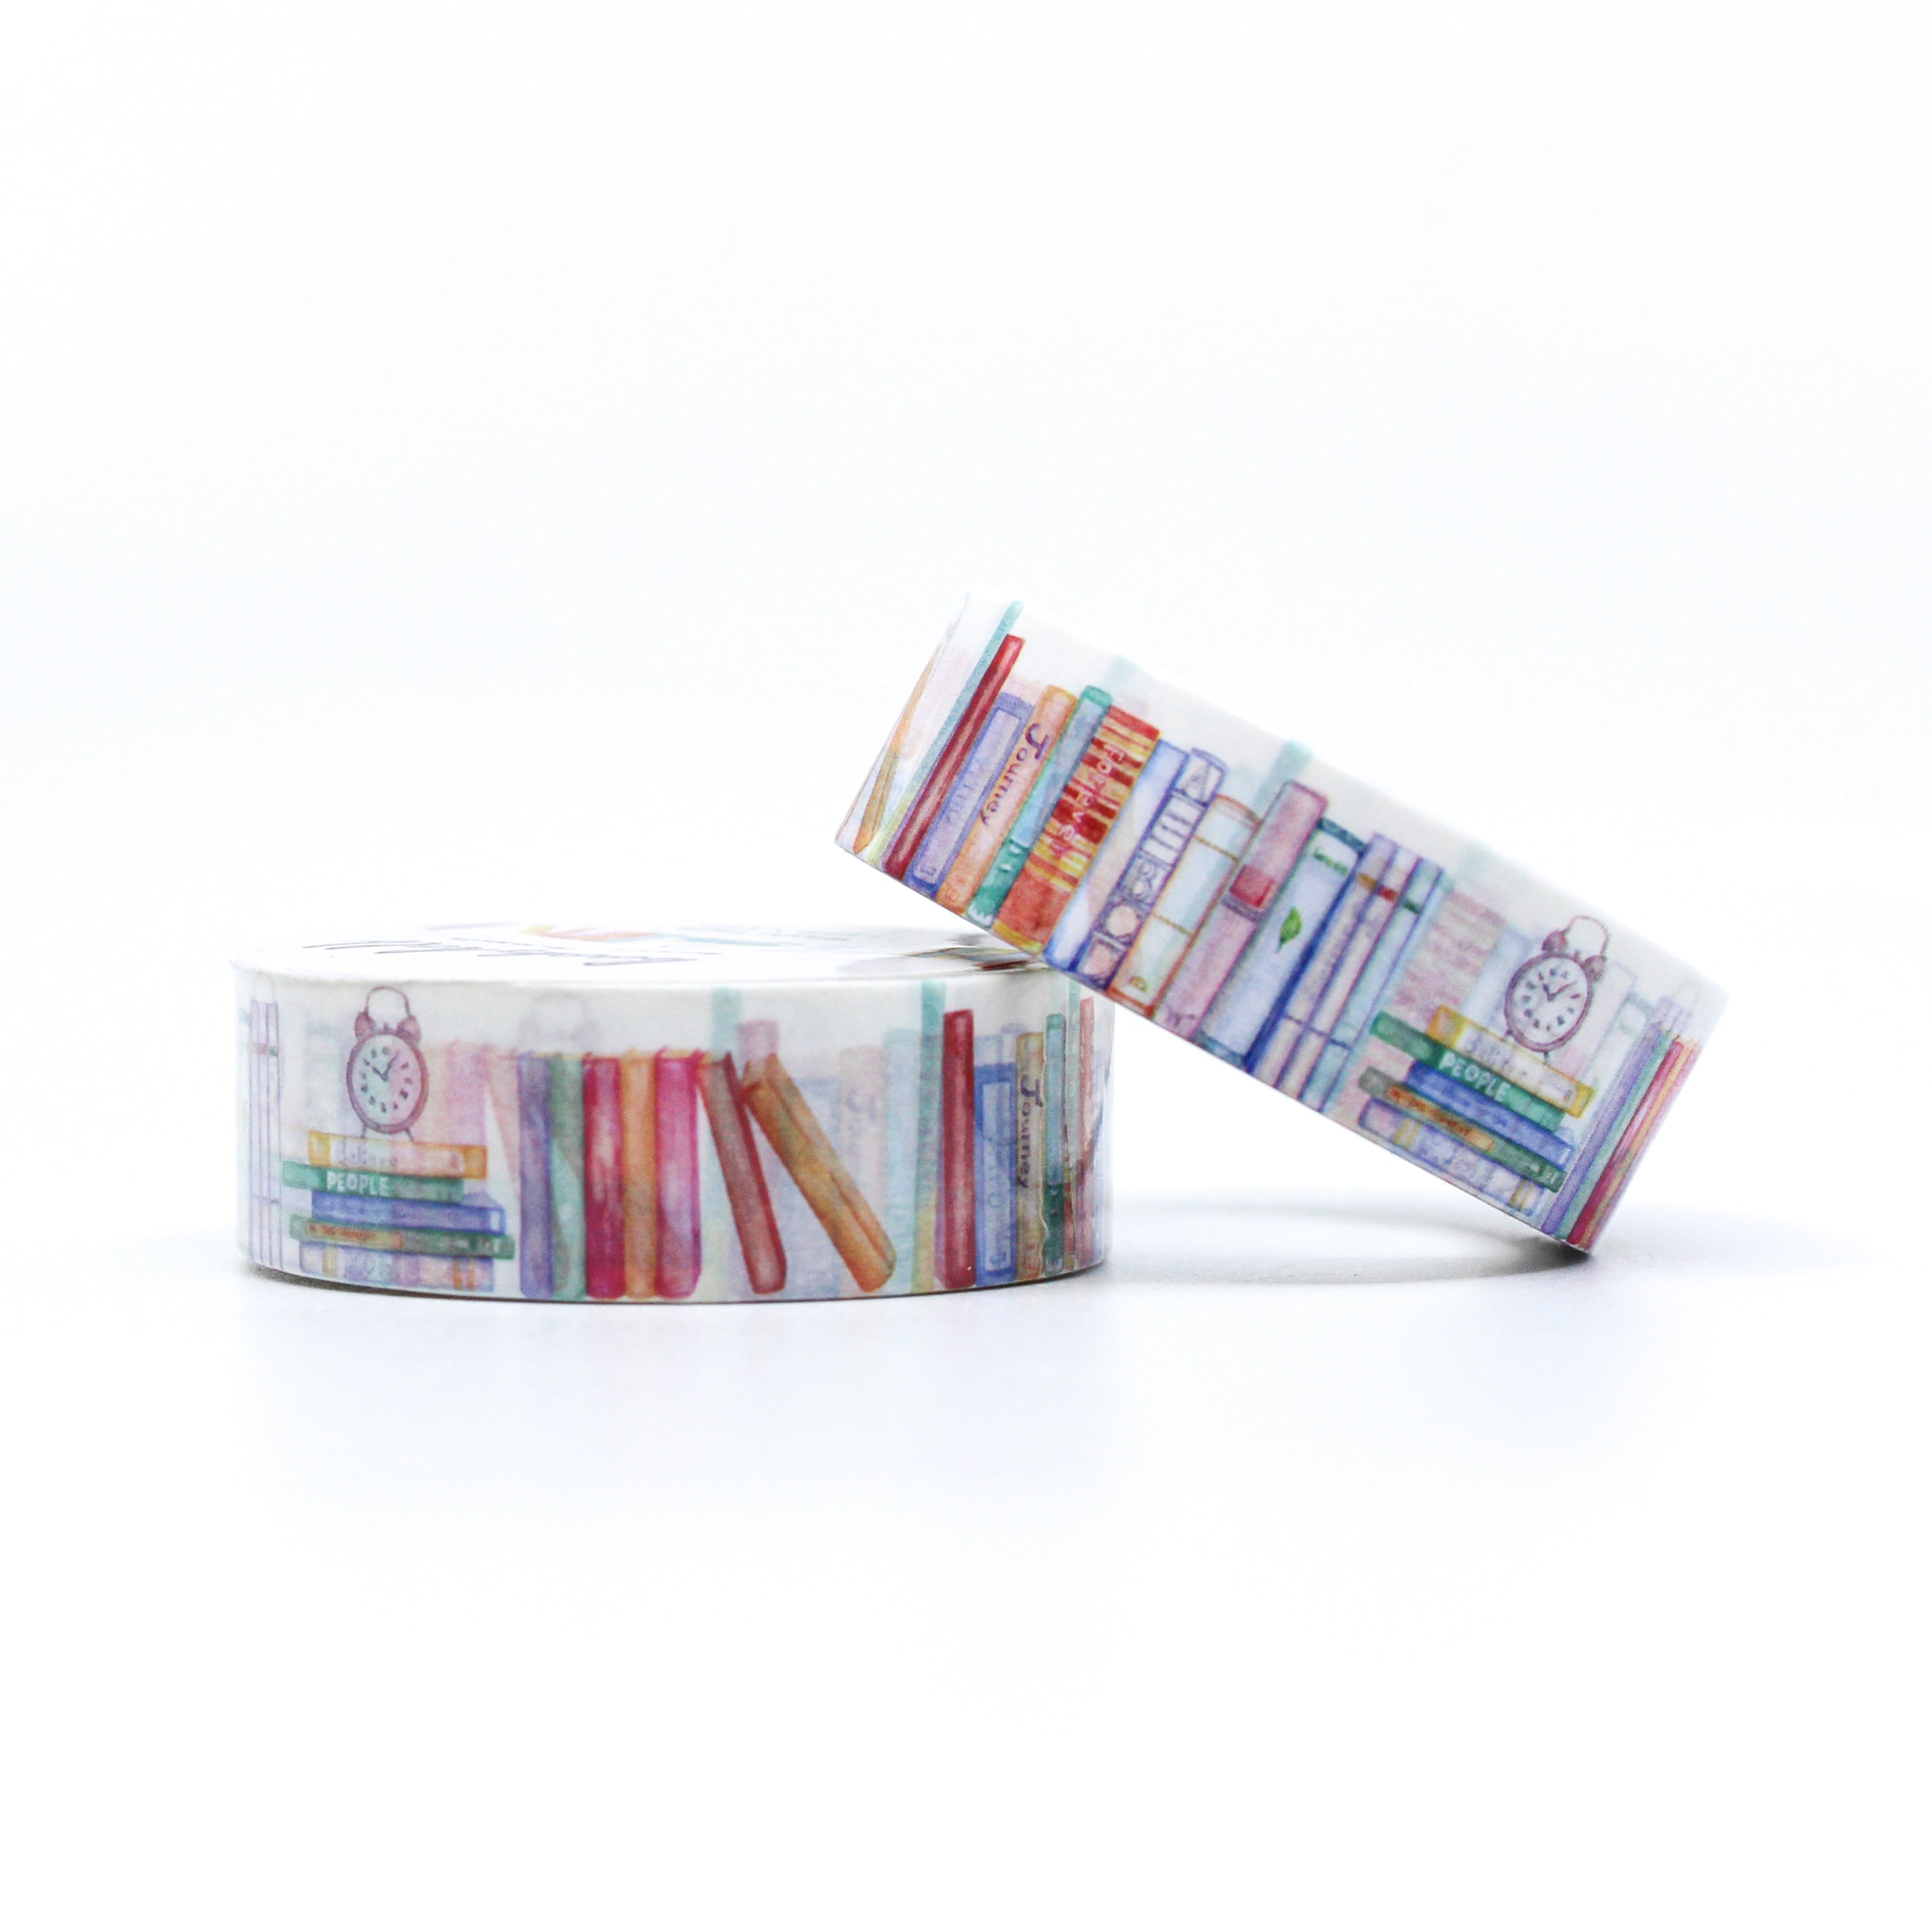 This is a roll of pencils washi tapes from BBB Supplies Craft Shop